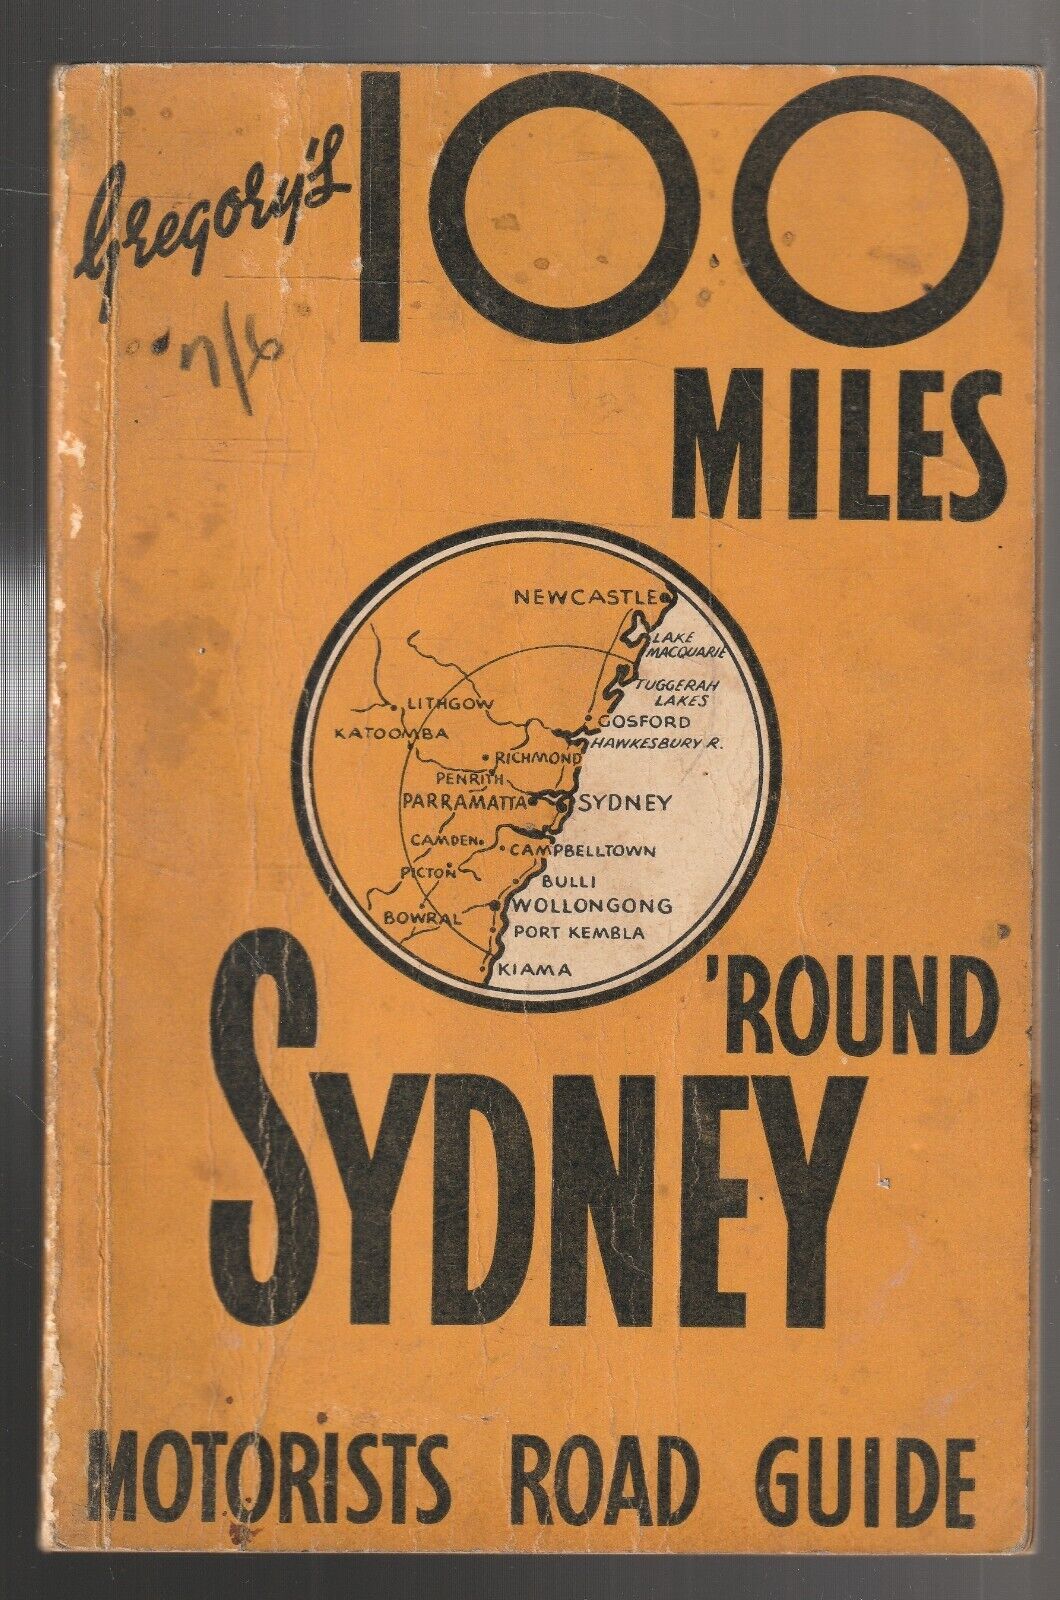 TRAVEL ,GREGORY\'S 100 MILES \'ROUND SYDNEY , MOTORISTS ROAD GUIDE 23rd ed